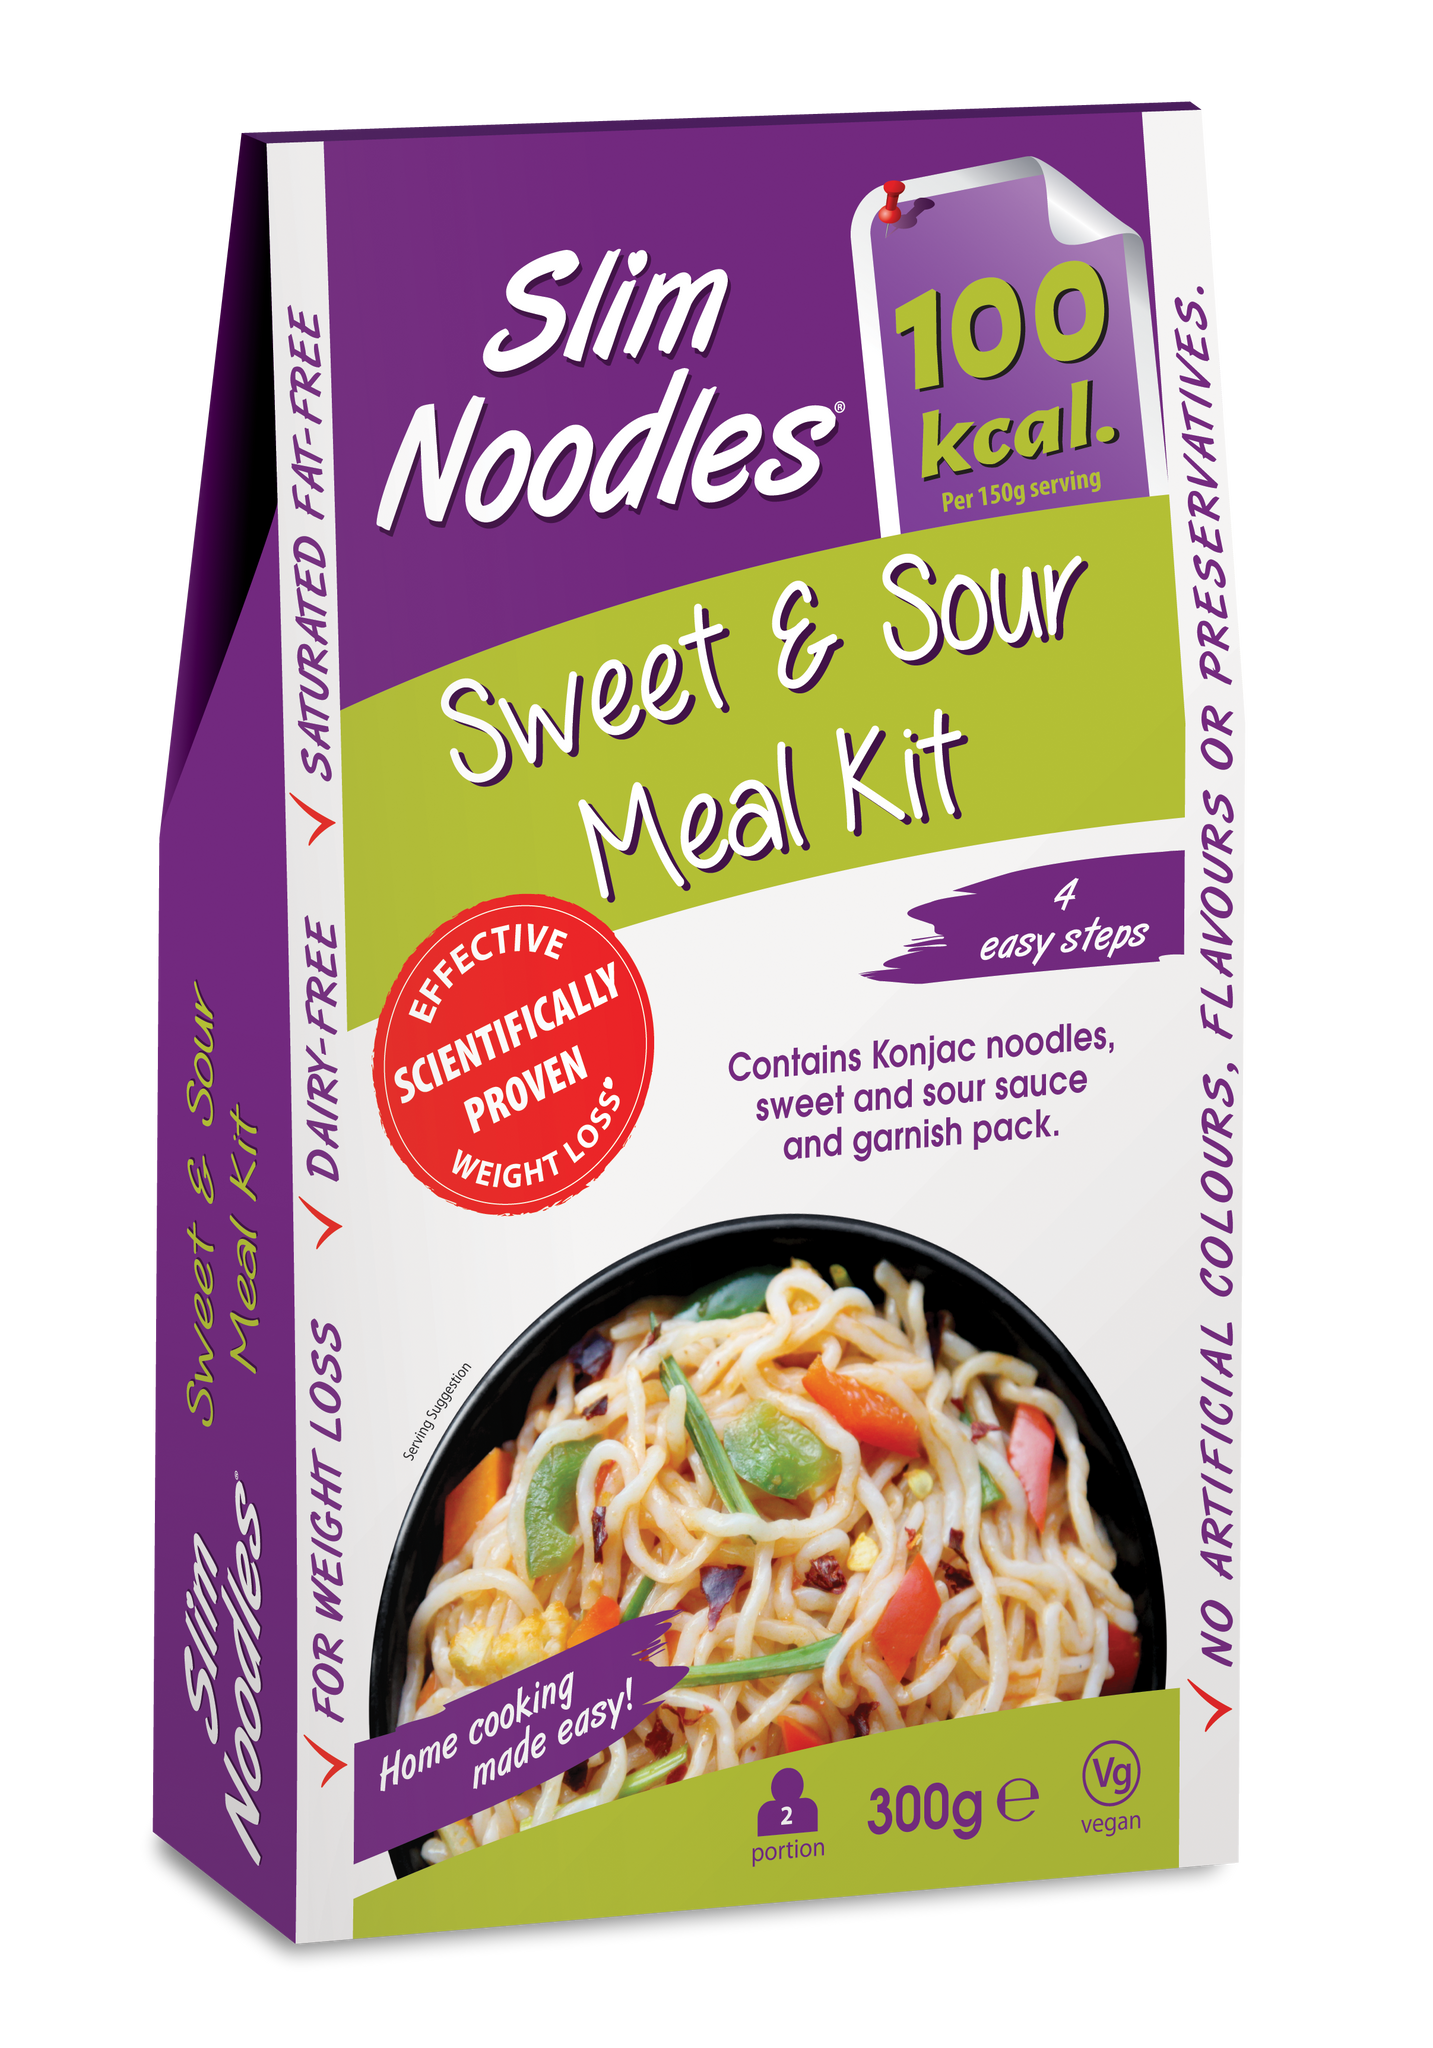 Slim Noodles Sweet & Sour Meal Kit 300g RRP 5.99 CLEARANCE XL 59p or 2 for 1